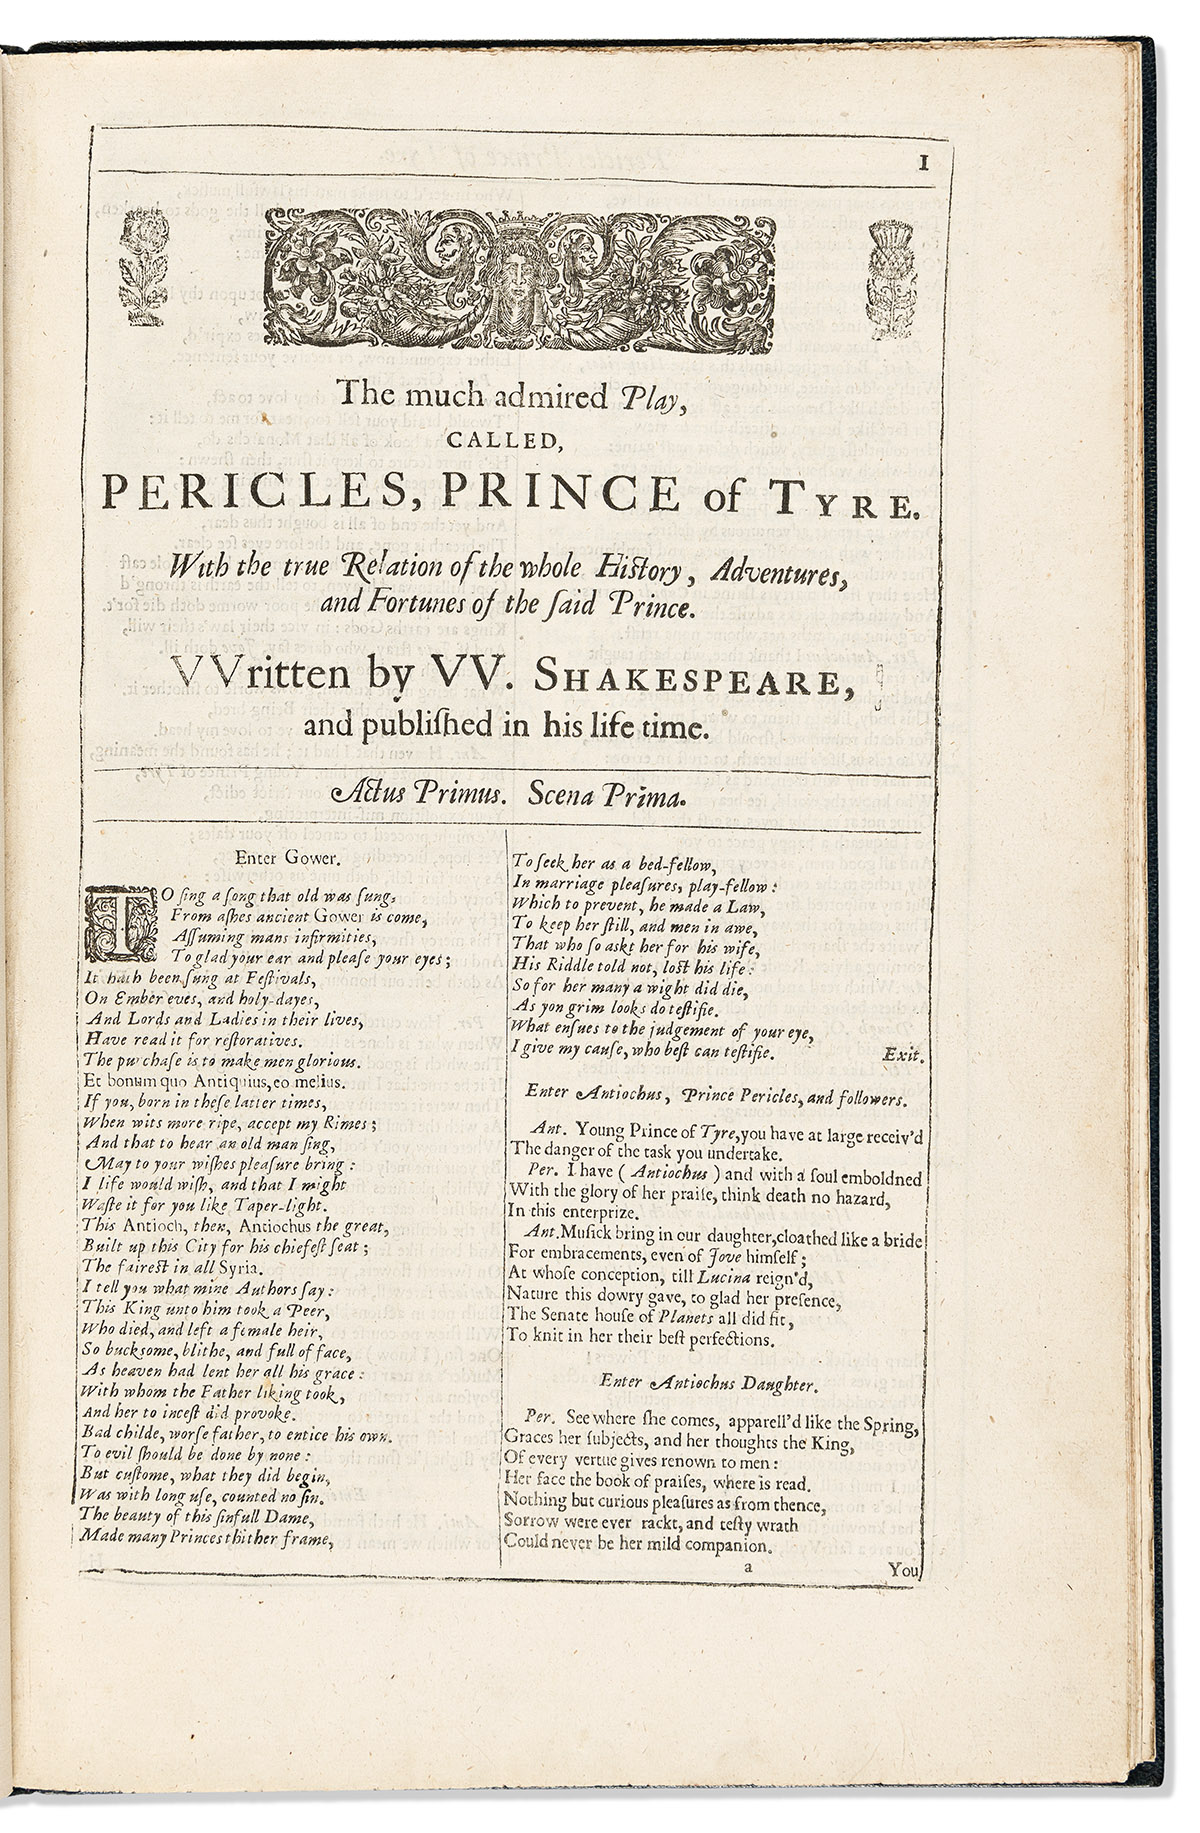 Shakespeare, William (1564-1616) The Seven Plays Added by Chetwinde to the Third Folio.